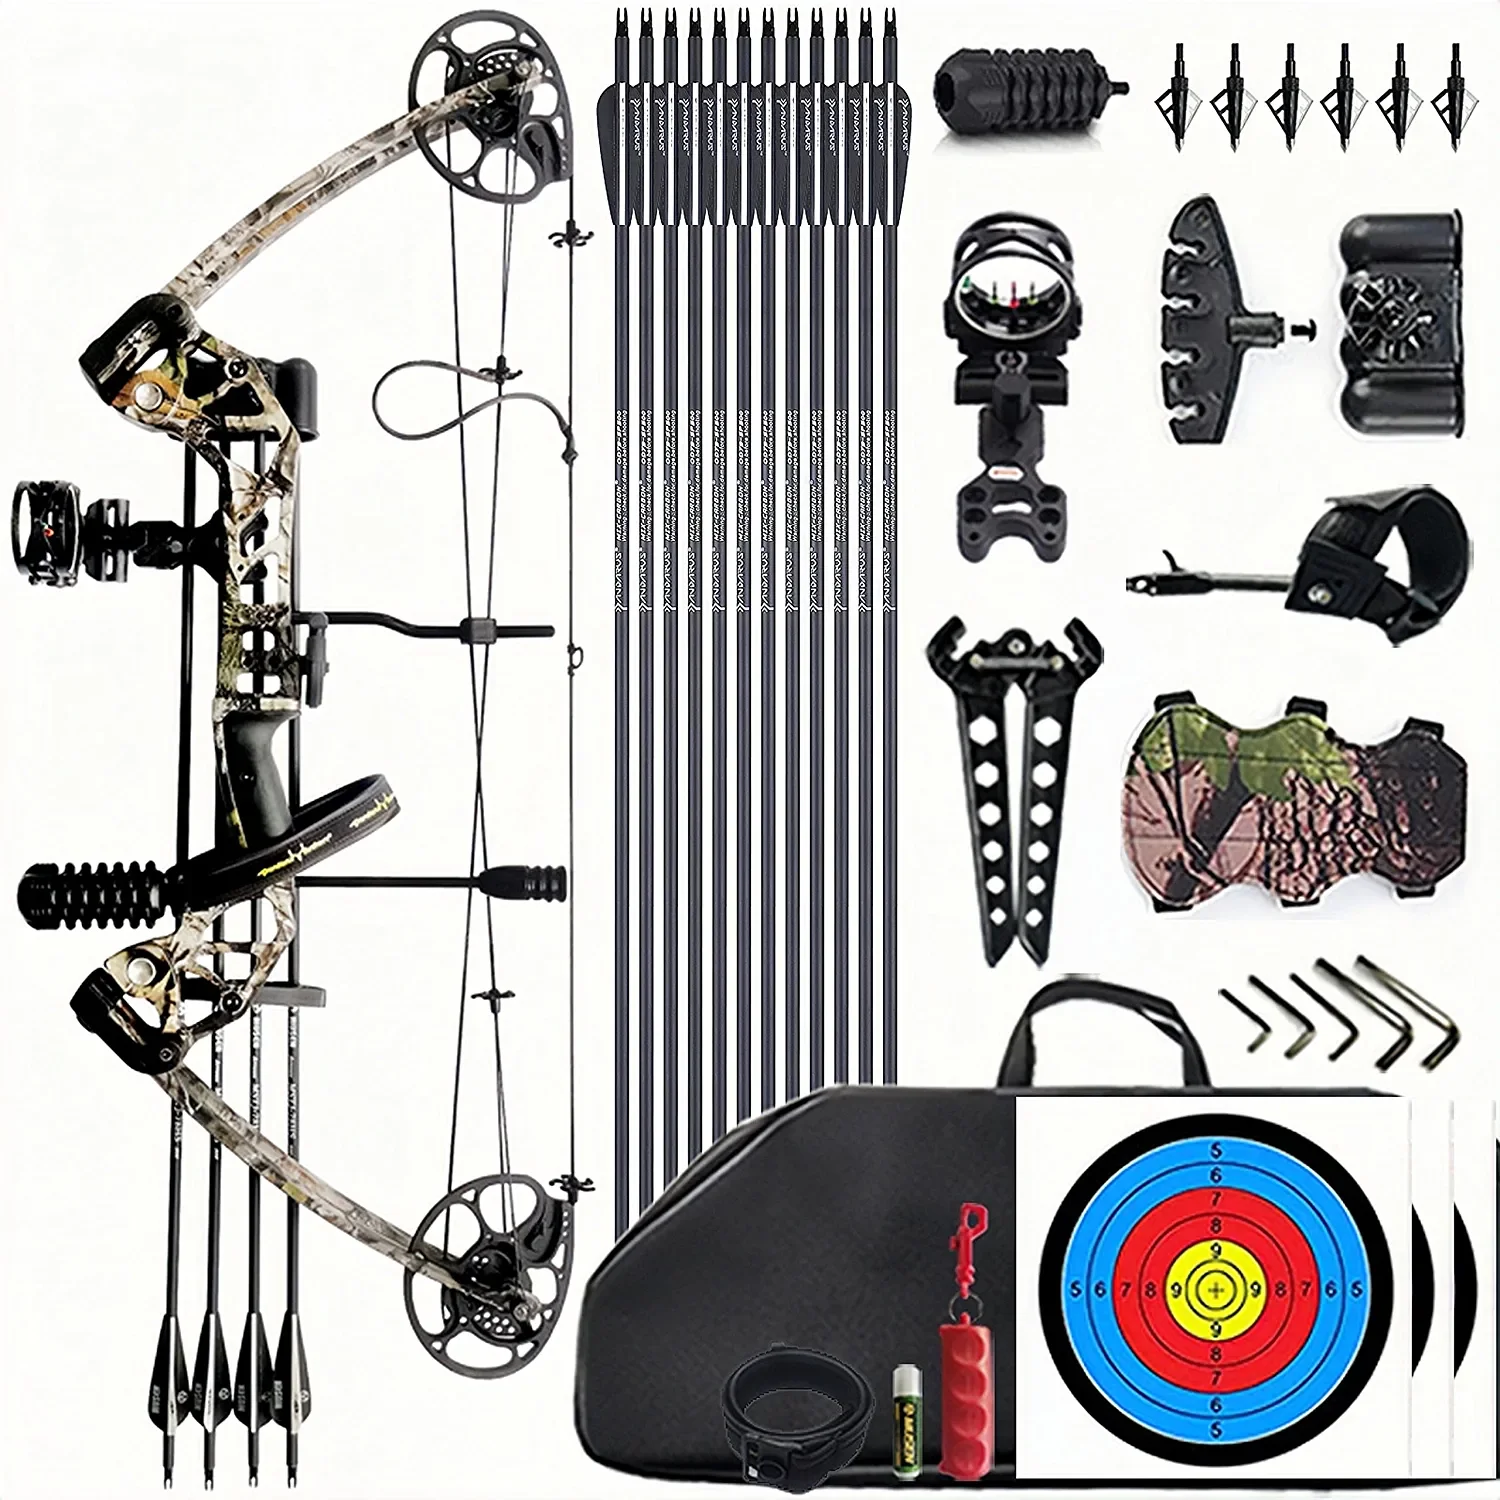 

Compound Bow and Archery Sets 0-70 lbs Compound Bow Outdoor Hunting Bow Fishing Shooting Sports Game Bow And Arrow